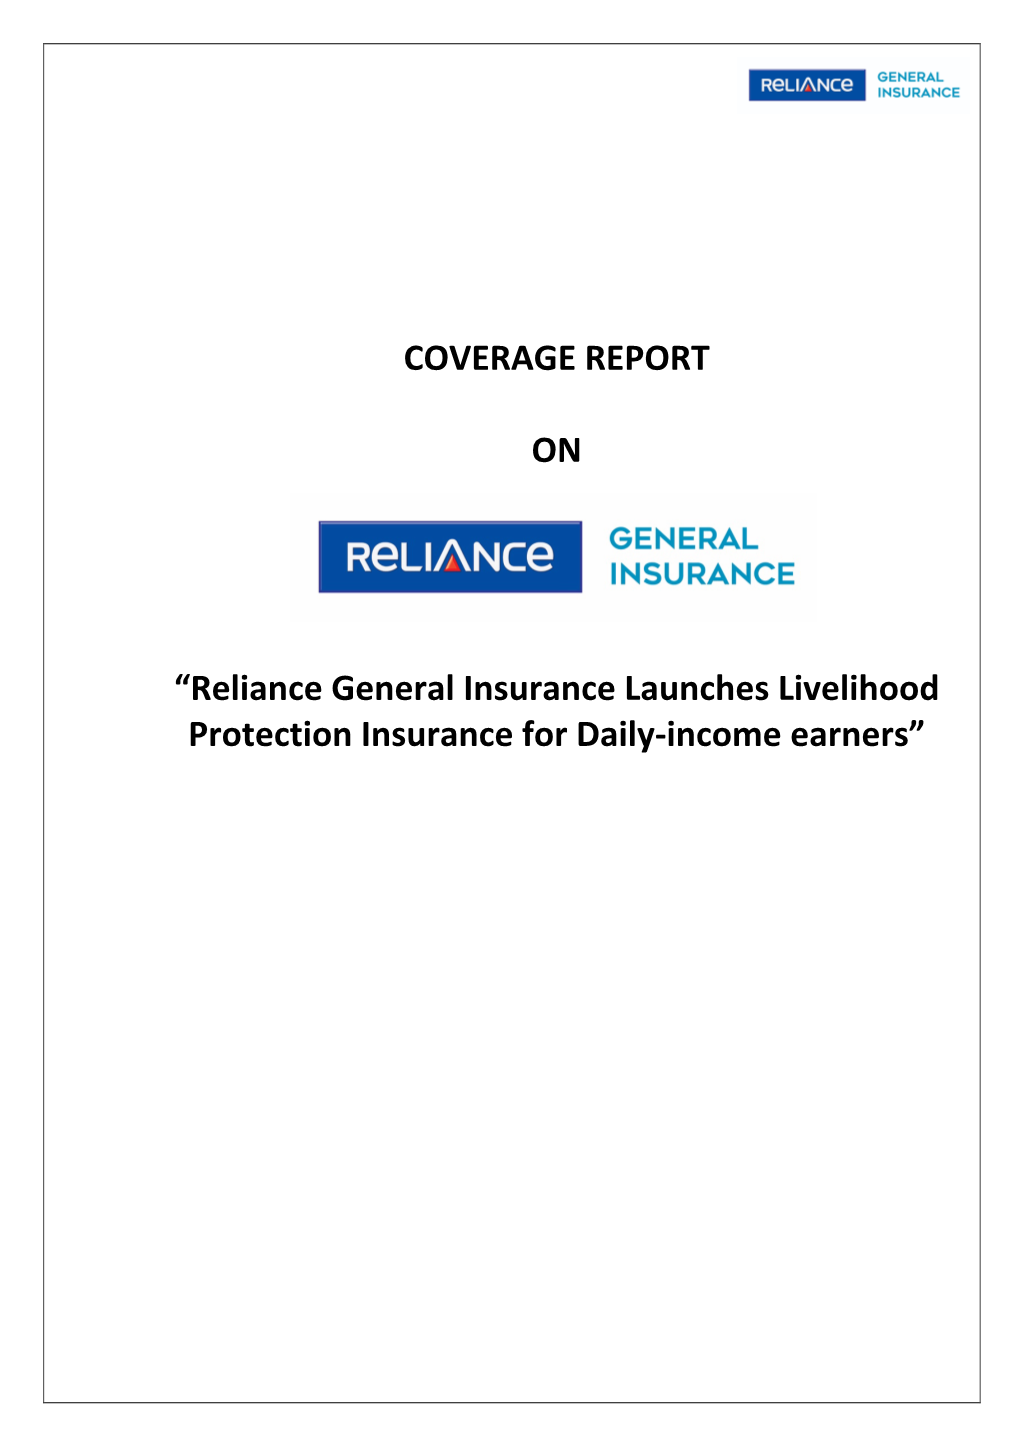 Reliance General Insurance Launches Livelihood Protection Insurance for Daily-Income Earners”